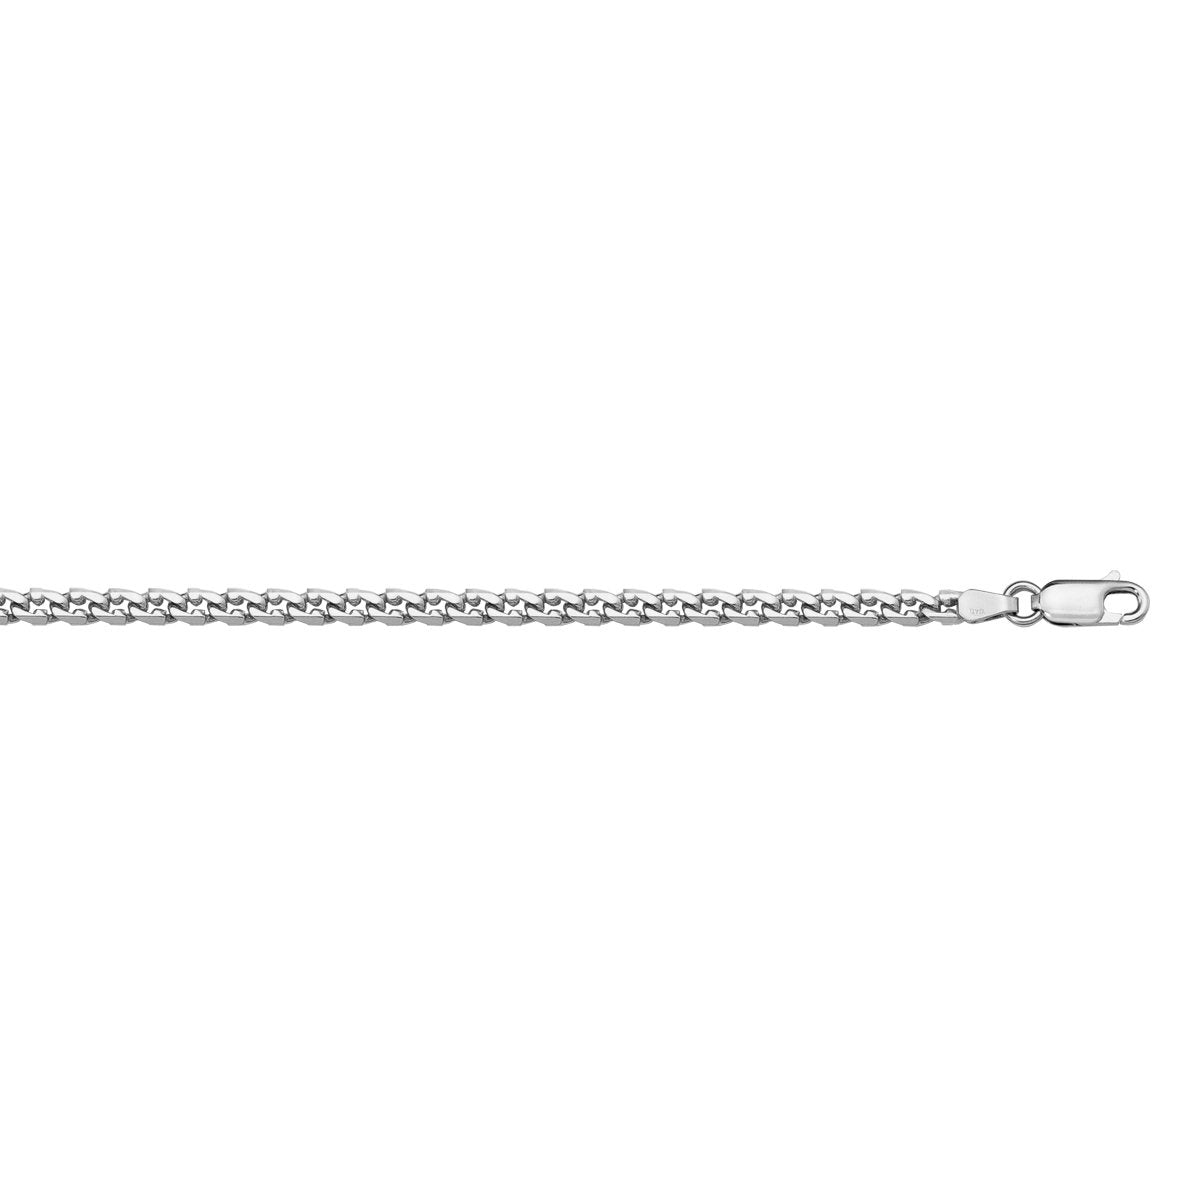 GOLD CHAIN WHITE GOLD SOLID L.F. LINK (LOBSTER CLASP) 